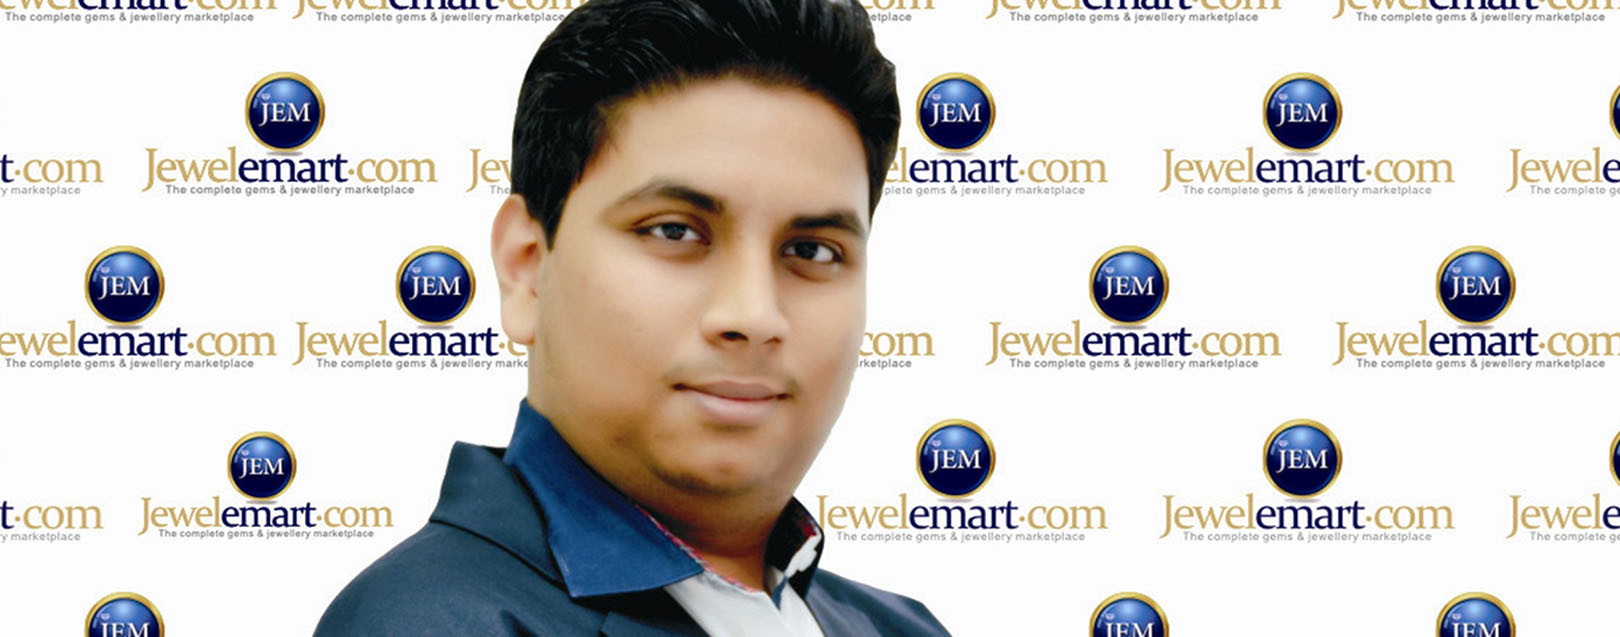 Online jewellery market is around $10 bn, which will shoot up to $18 bn in 3 yrs: Adish Shah